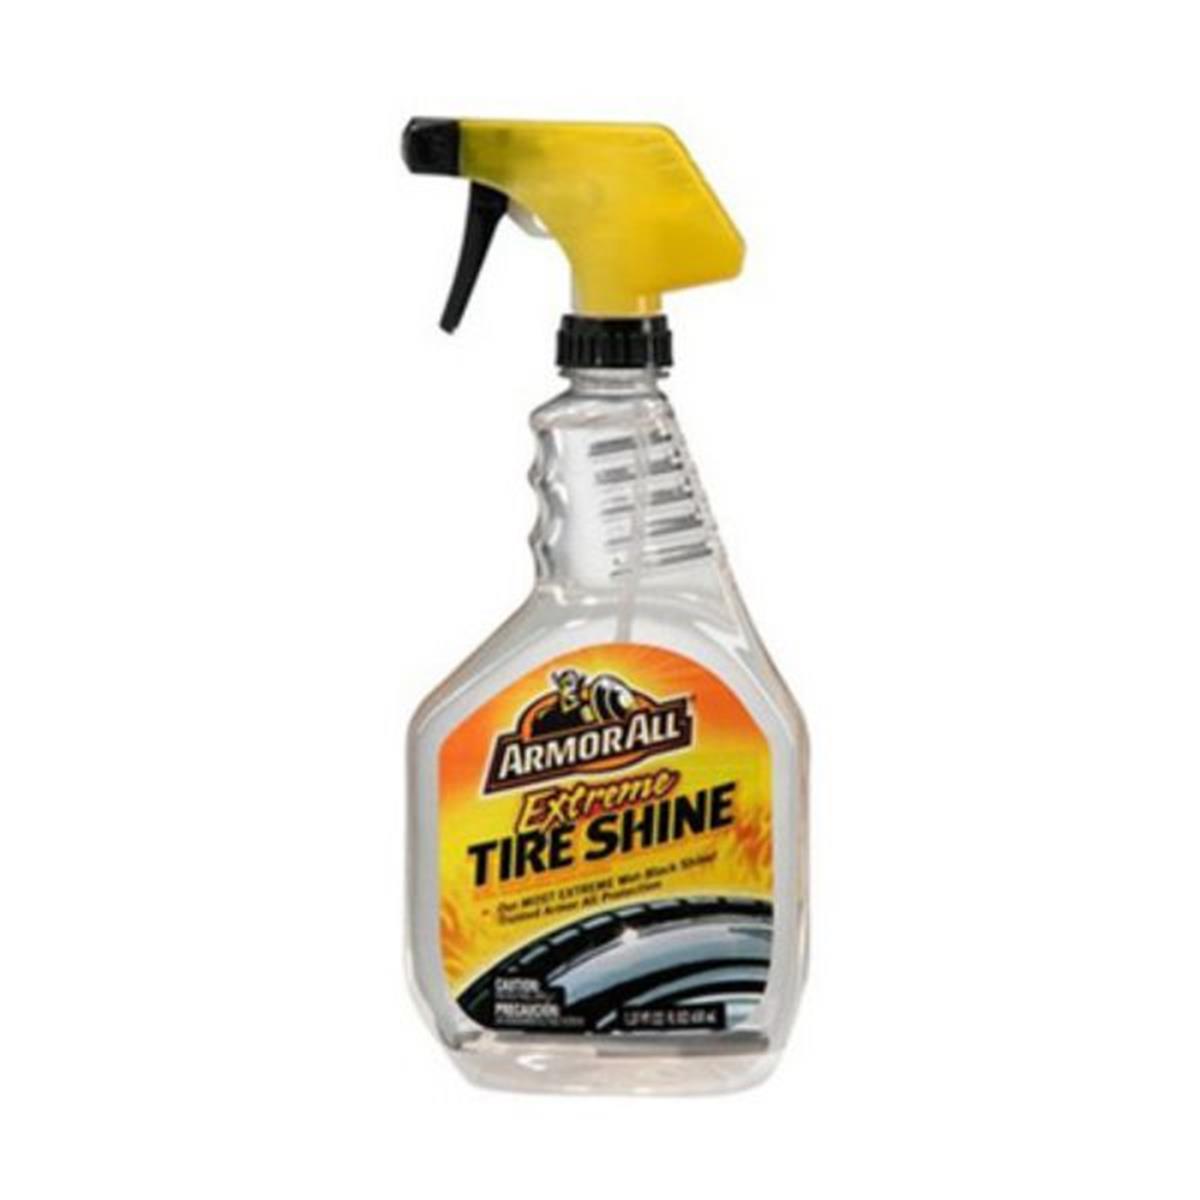 Picture of Armor All 78004 22 oz Extreme Tire Shine Cleaner